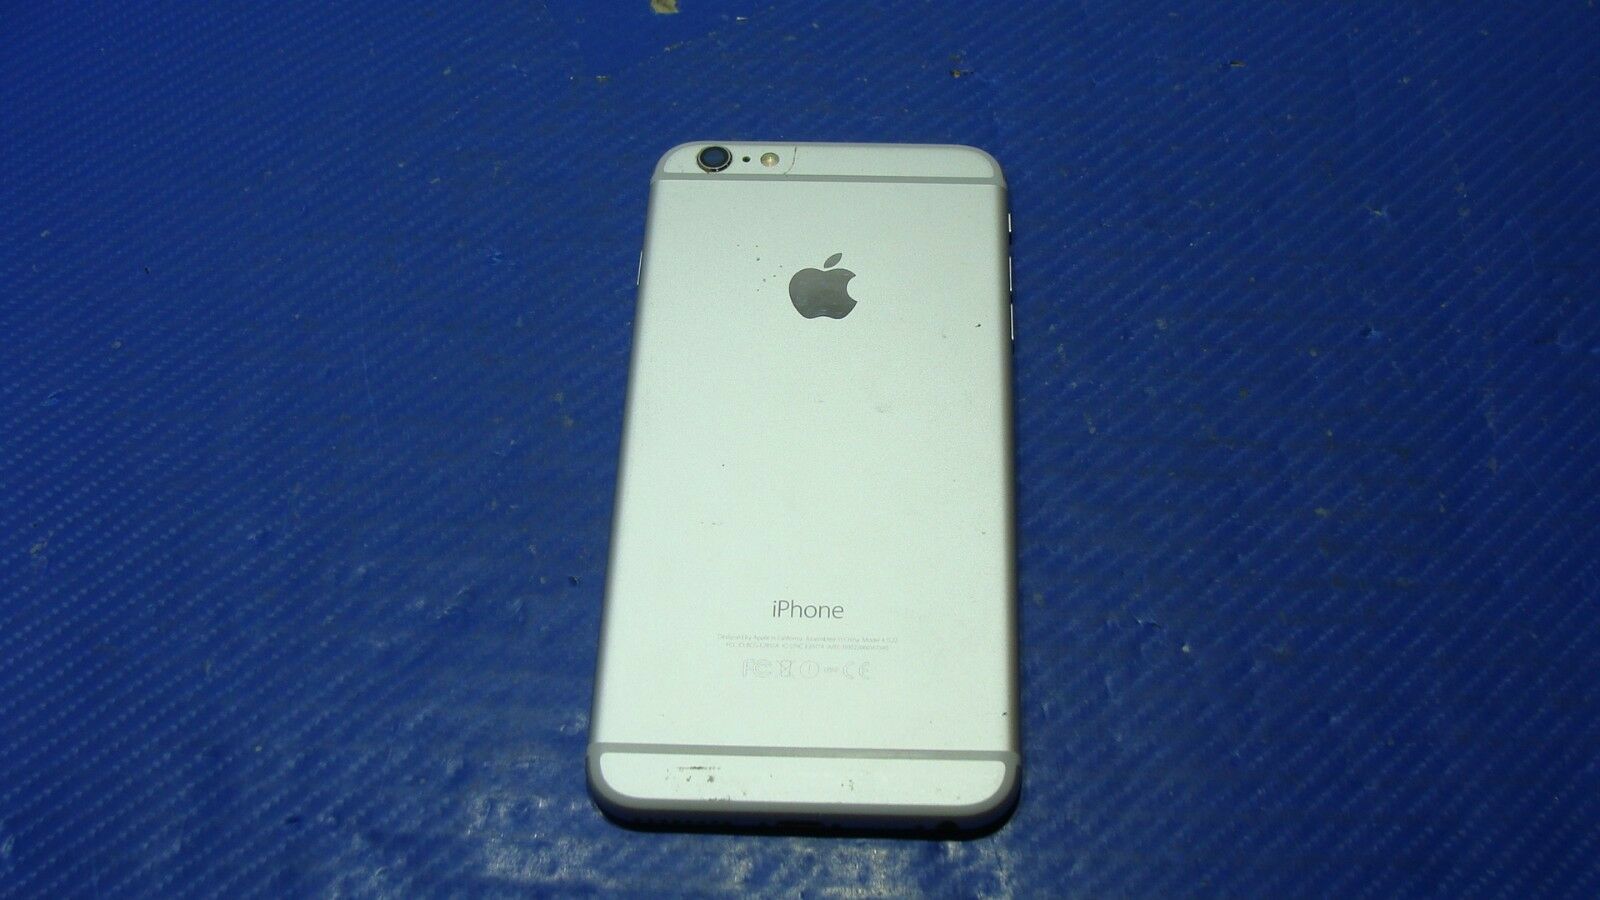 iPhone 6 Plus AT&T A1522 MGAM2LL/A Late 2014 5.5